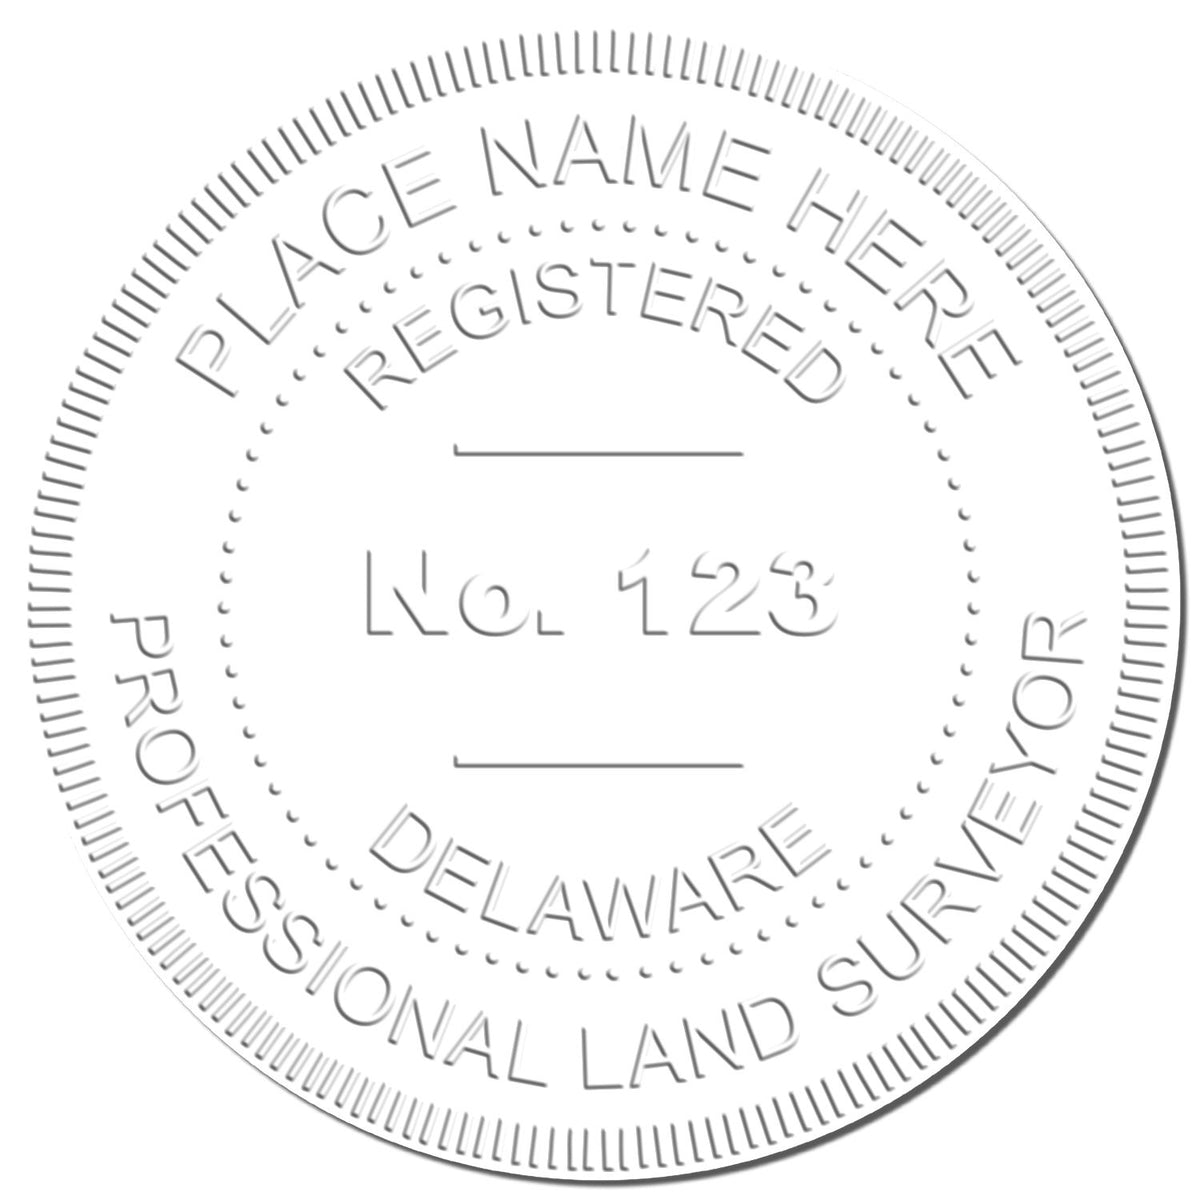 This paper is stamped with a sample imprint of the Handheld Delaware Land Surveyor Seal, signifying its quality and reliability.